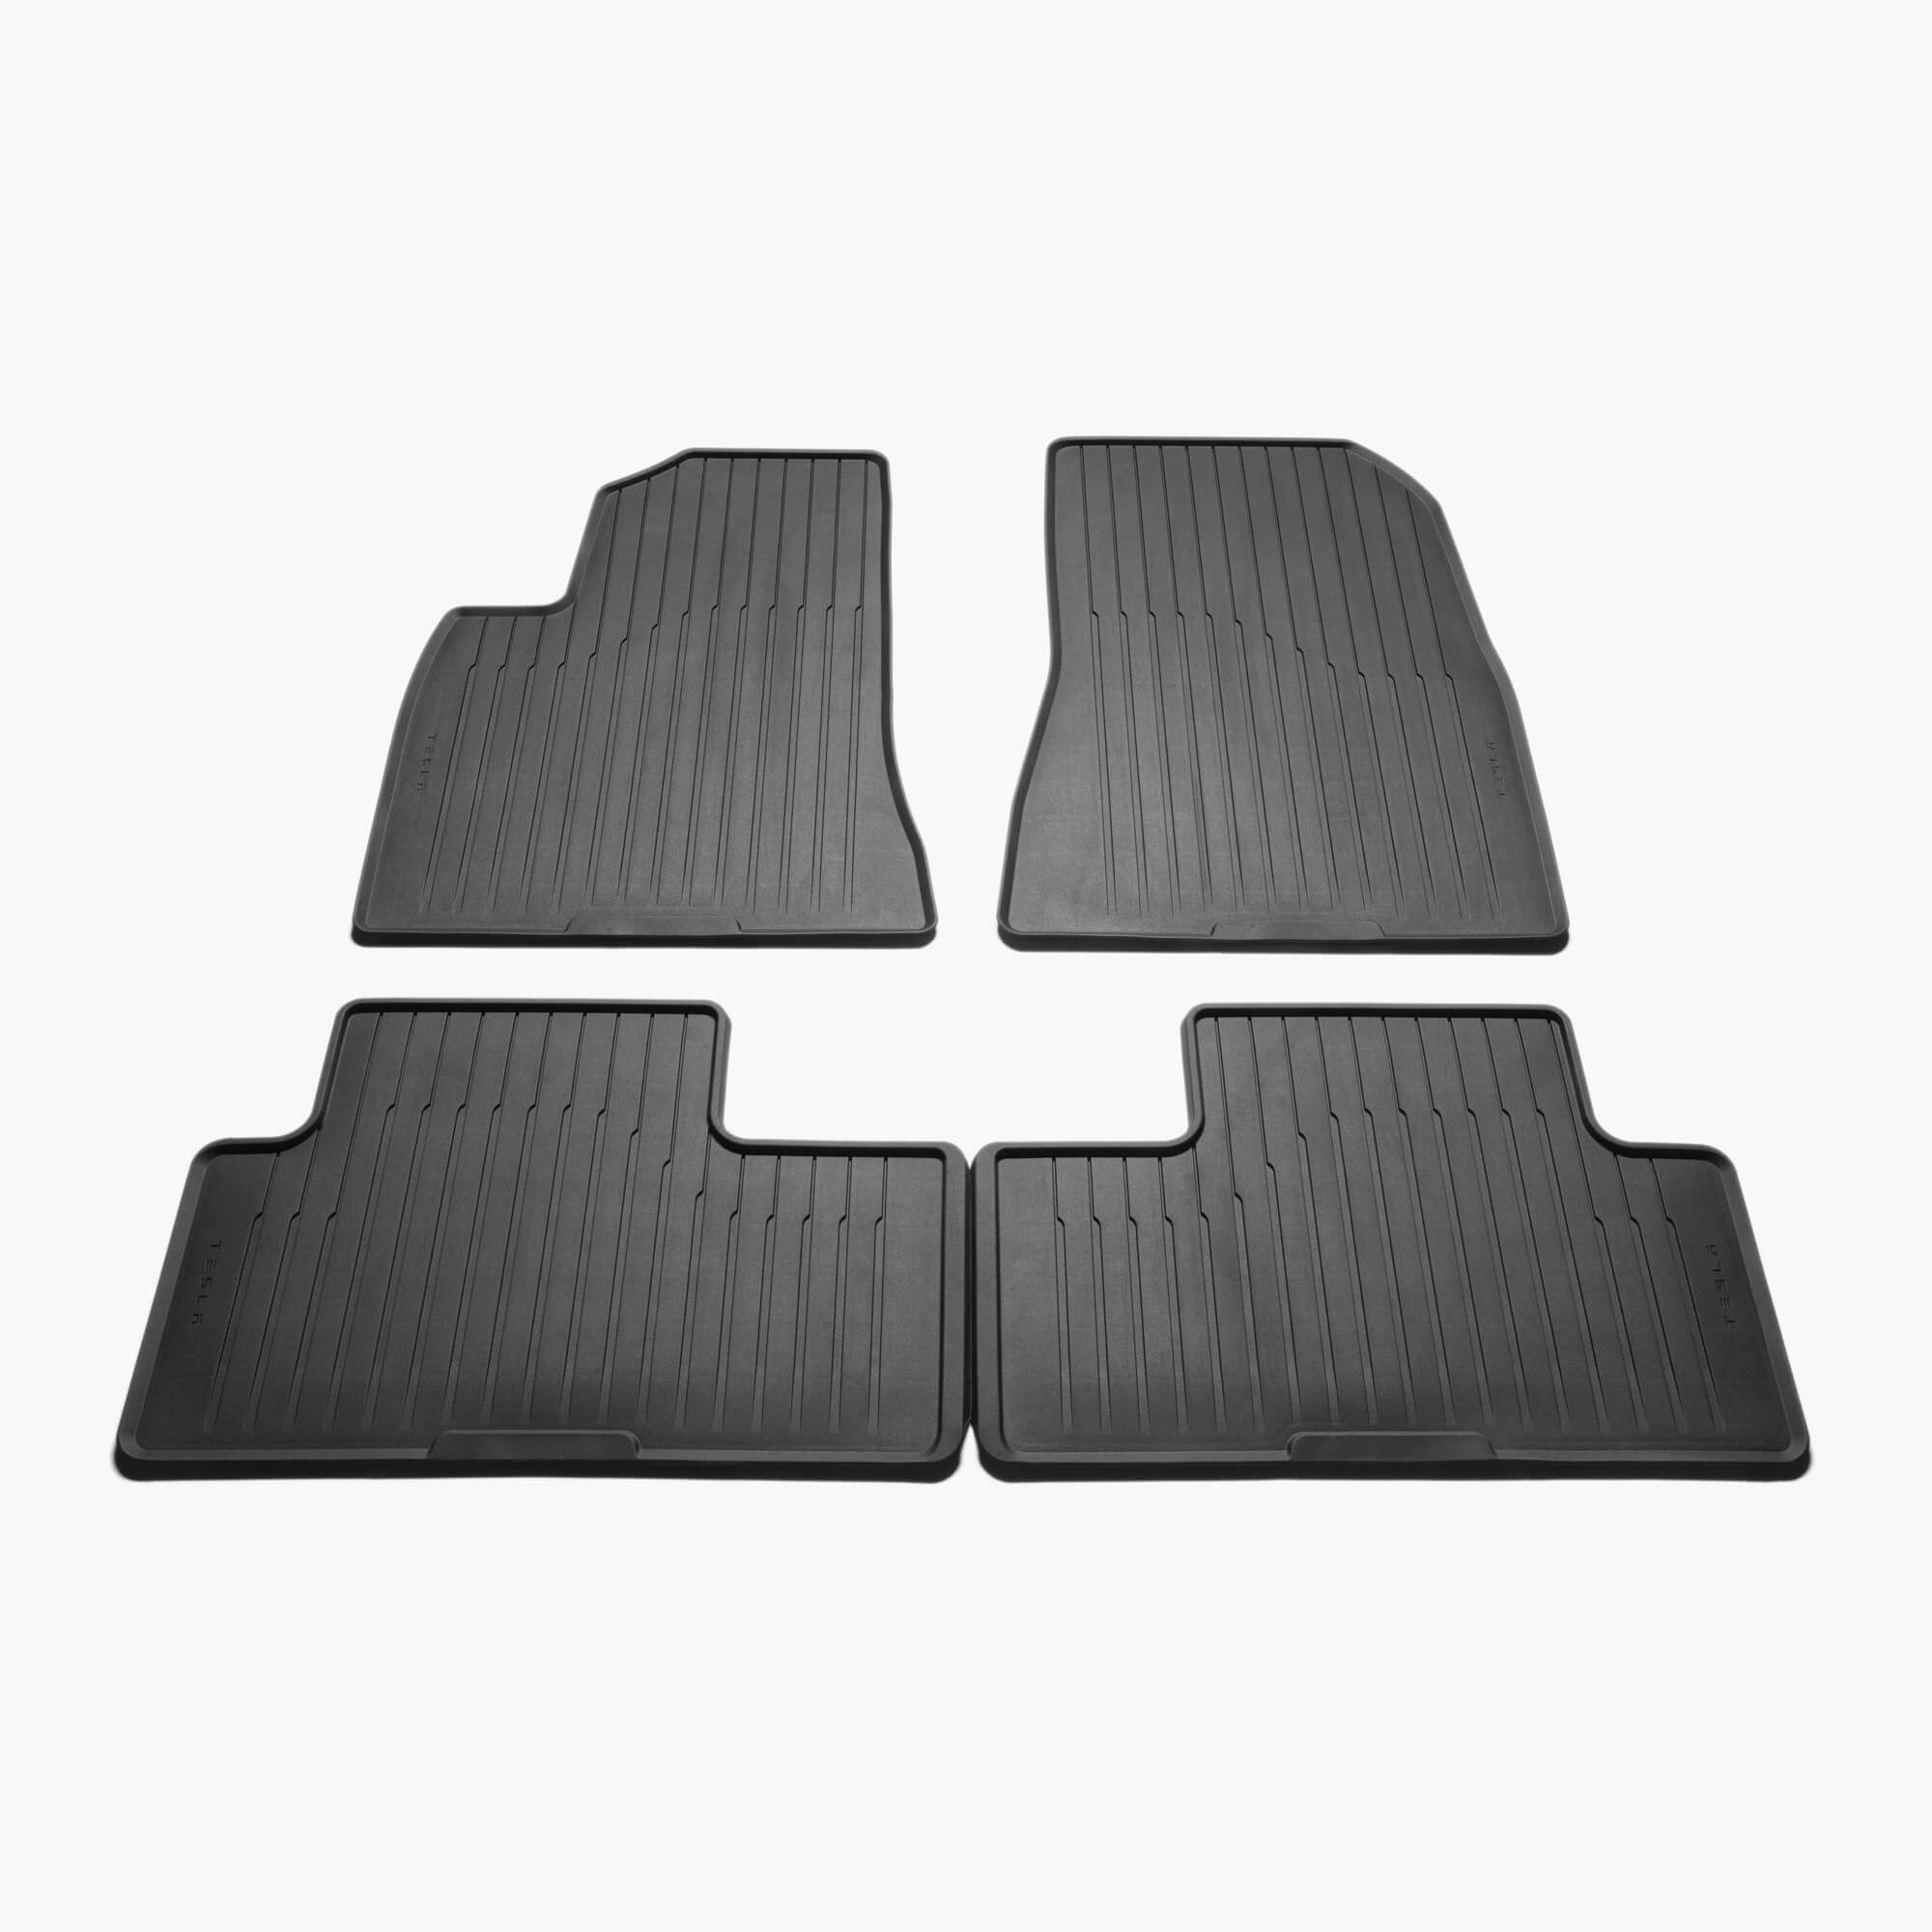 Model 3 All Weather Interior Mats